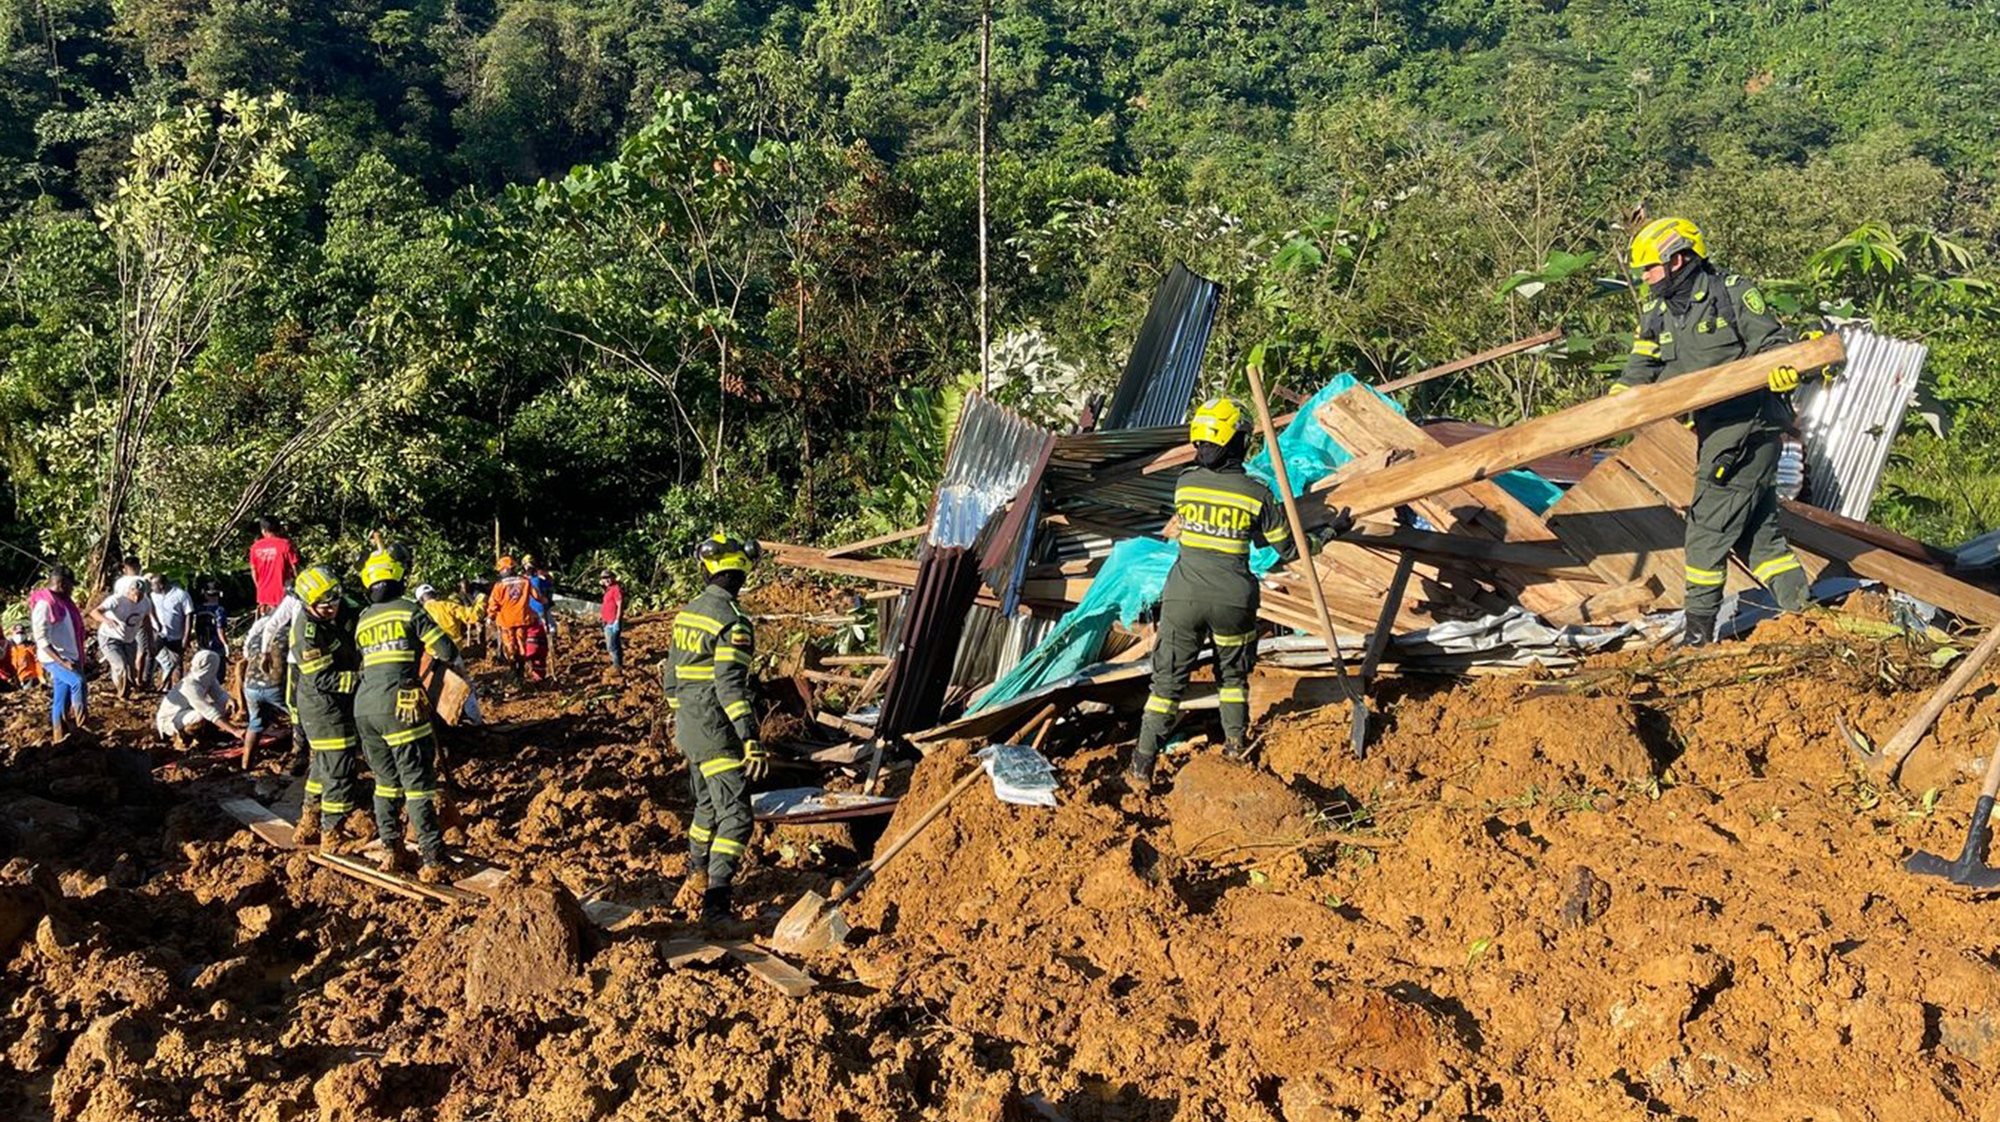 epa11074106 A handout photo made available by the National Police shows rescue workers in the area where a landslide occurred on a road near the town Carmen de Atrato, Choco department, Colombia, 12 January 2024 (issued 13 January 2024). At least 23 people died and 25 others were injured on 12 January in two landslides on a road near the town of Carmen de Atrato, in the western Colombian department of Choco, mayor of Carmen de Atrato, Jaime Herrera, confirmed. The landslide occurred on the road between Medellin and Quibdo, the capital of Choco, apparently caused by a flood, and buried several vehicles.  EPA/NATIONAL POLICE HANDOUT EDITORIAL USE ONLY/NO SALES HANDOUT EDITORIAL USE ONLY/NO SALES HANDOUT EDITORIAL USE ONLY/NO SALES